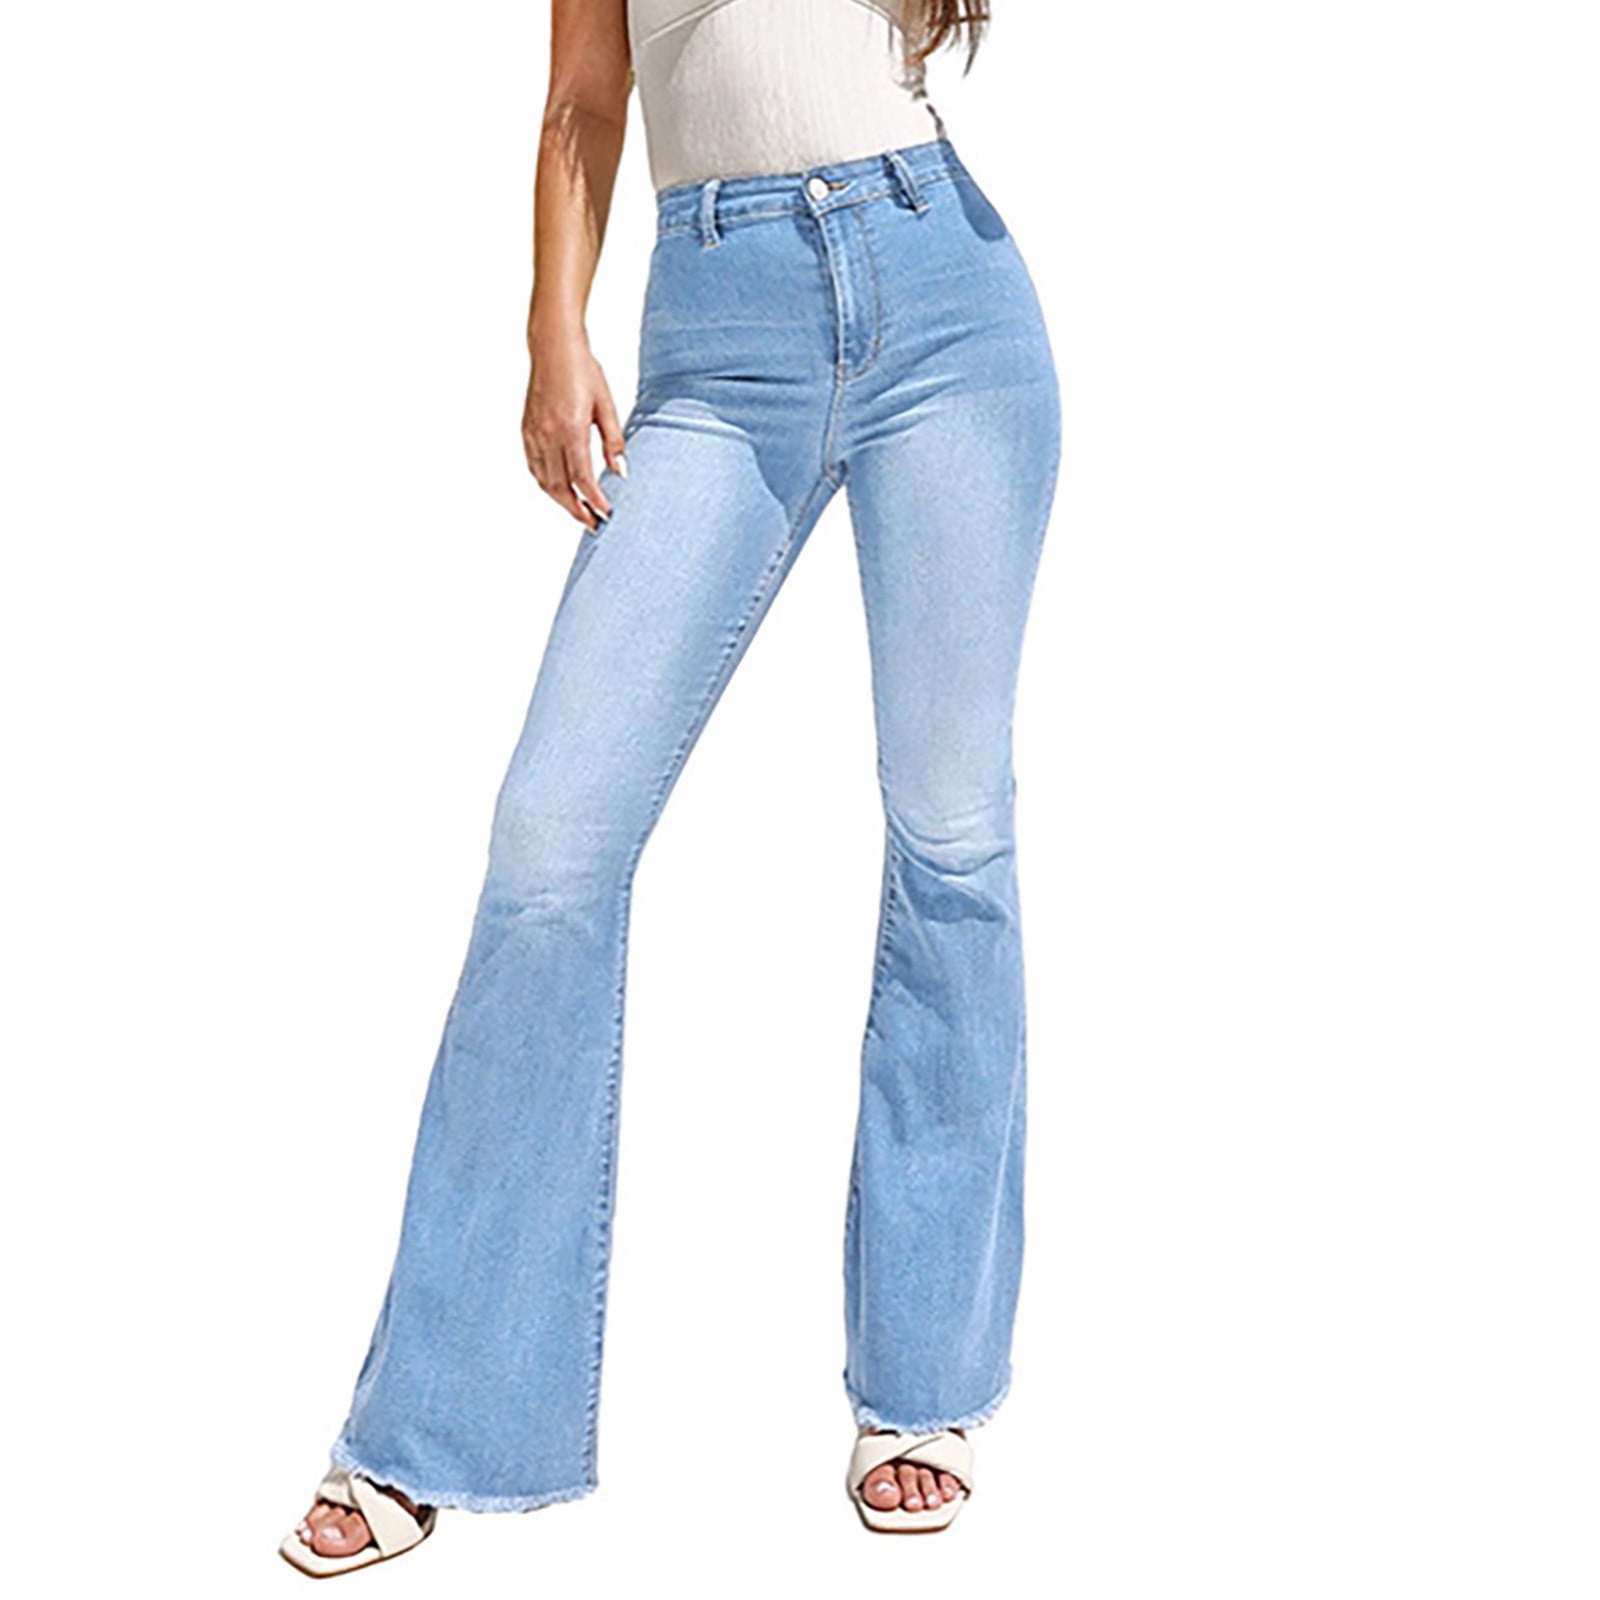 New Look low rise flare jeans in light blue